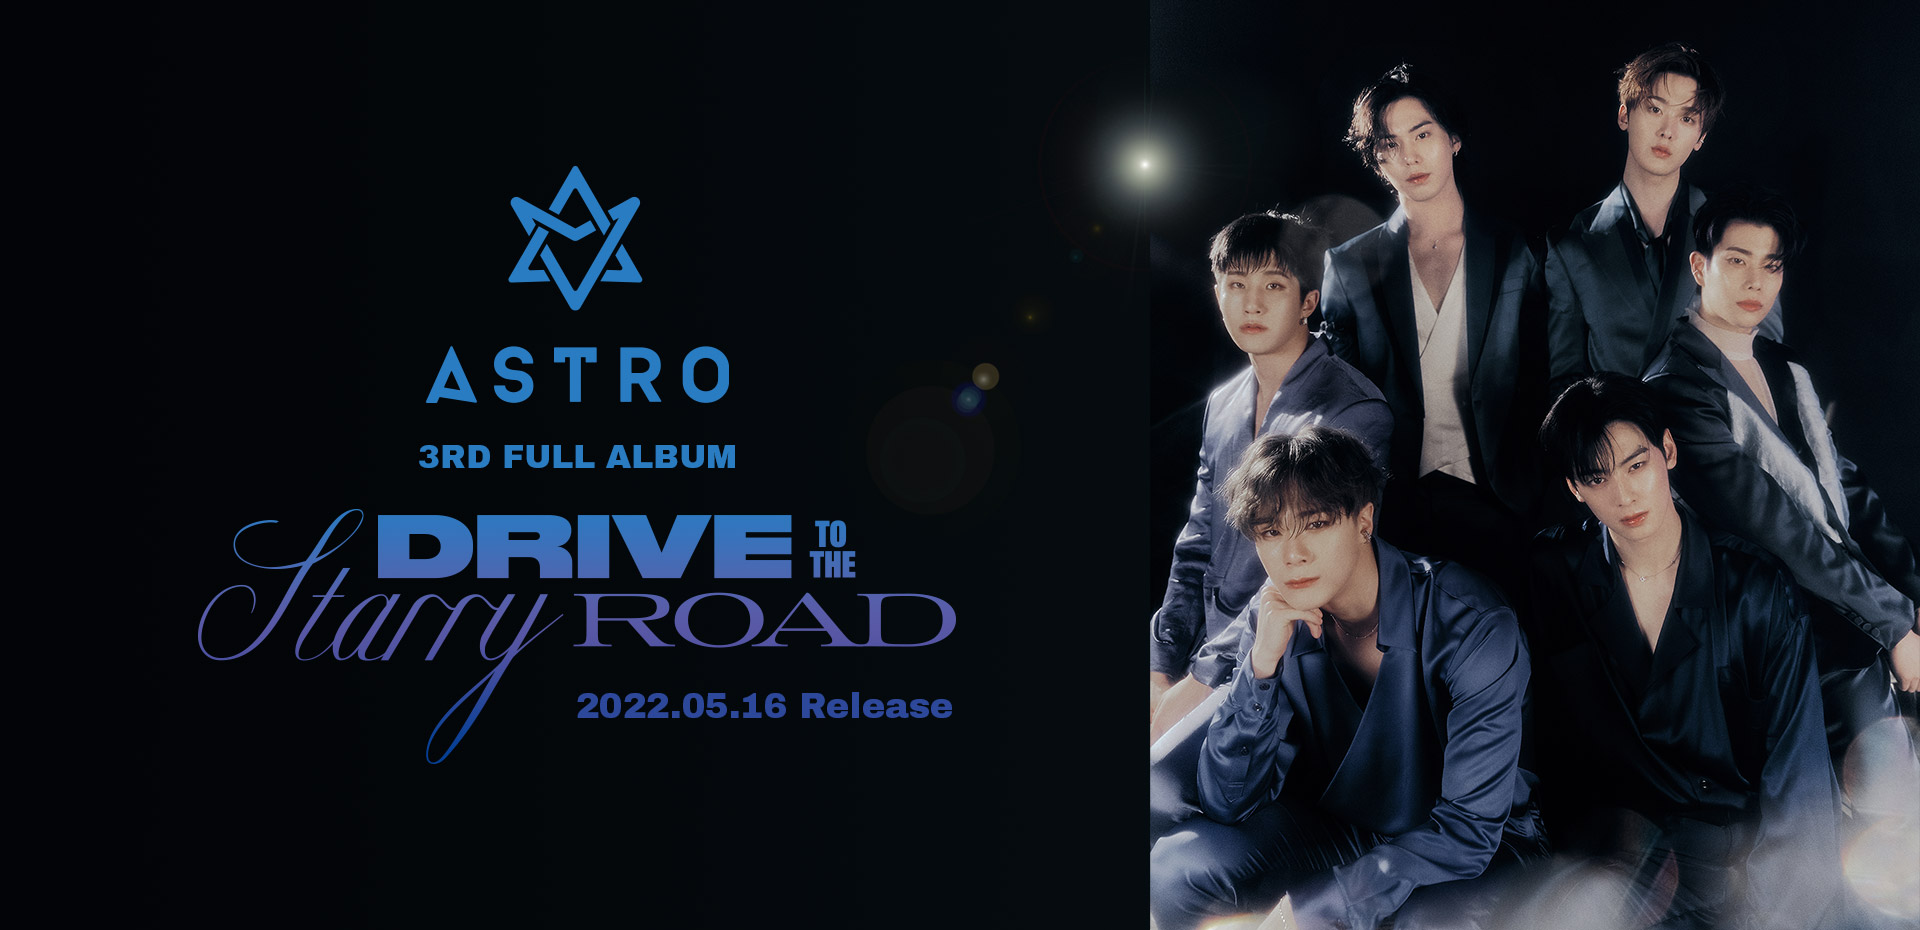 ASTRO 3RD FULL ALBUM'Drive to the Starry Road'